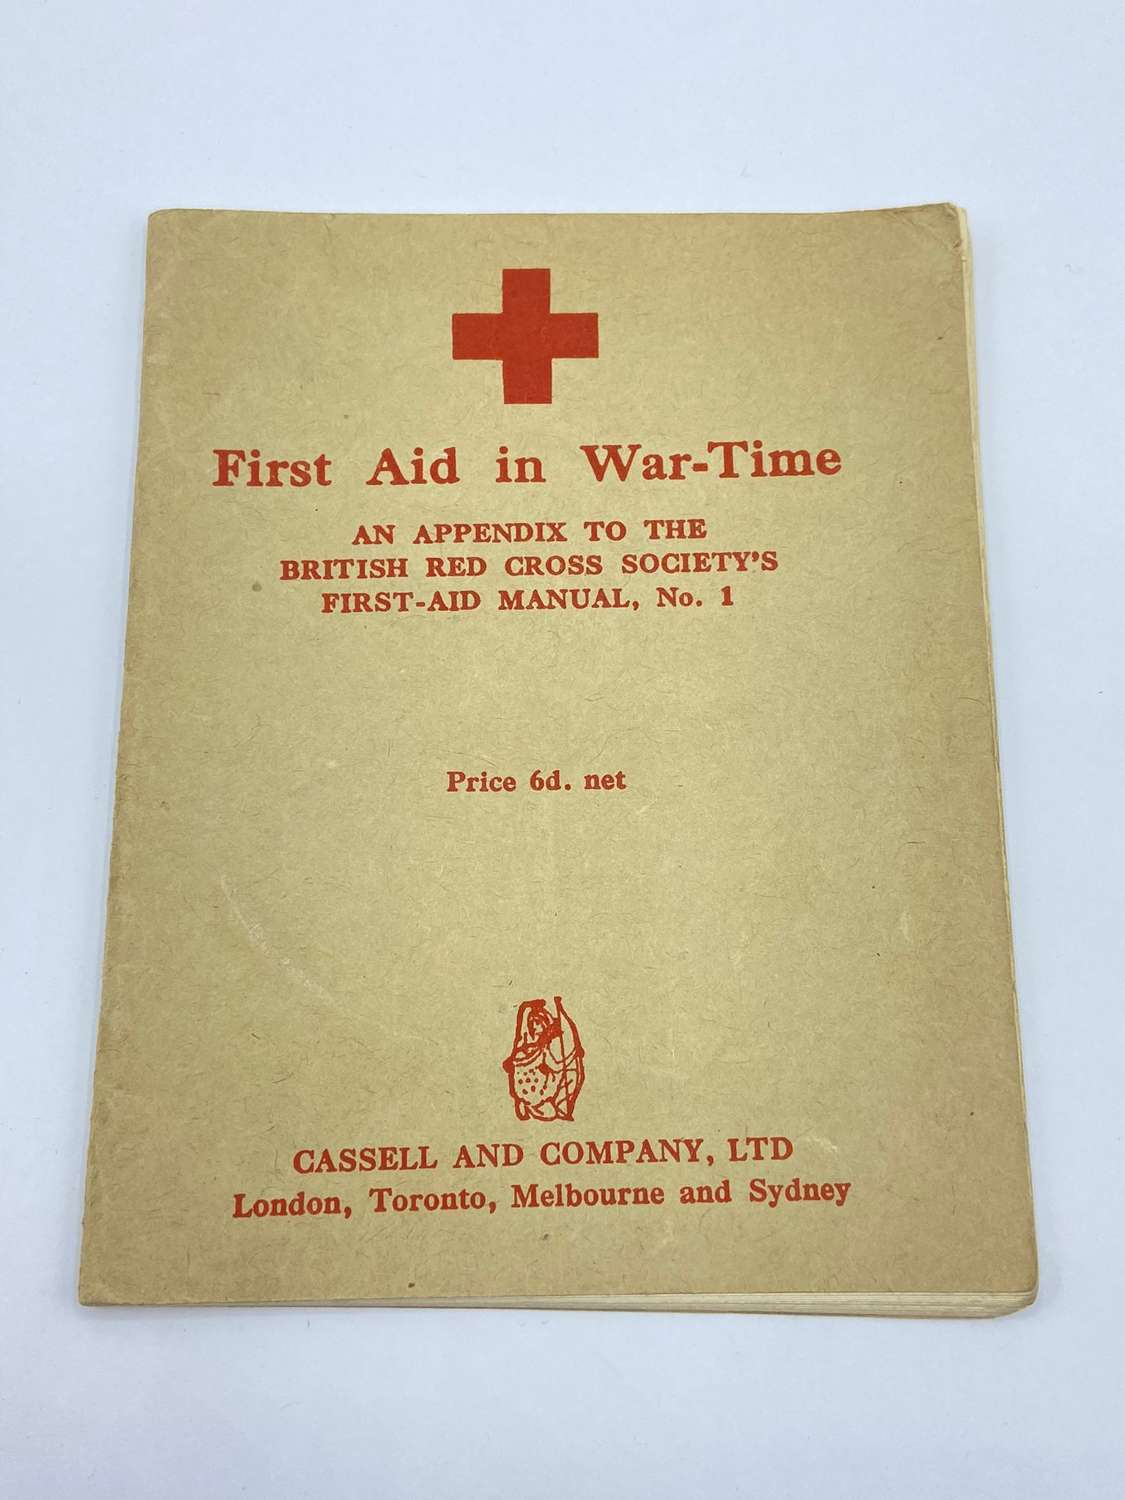 WW2 British First Aid In War-Time Red Cross First Aid Manual 1942